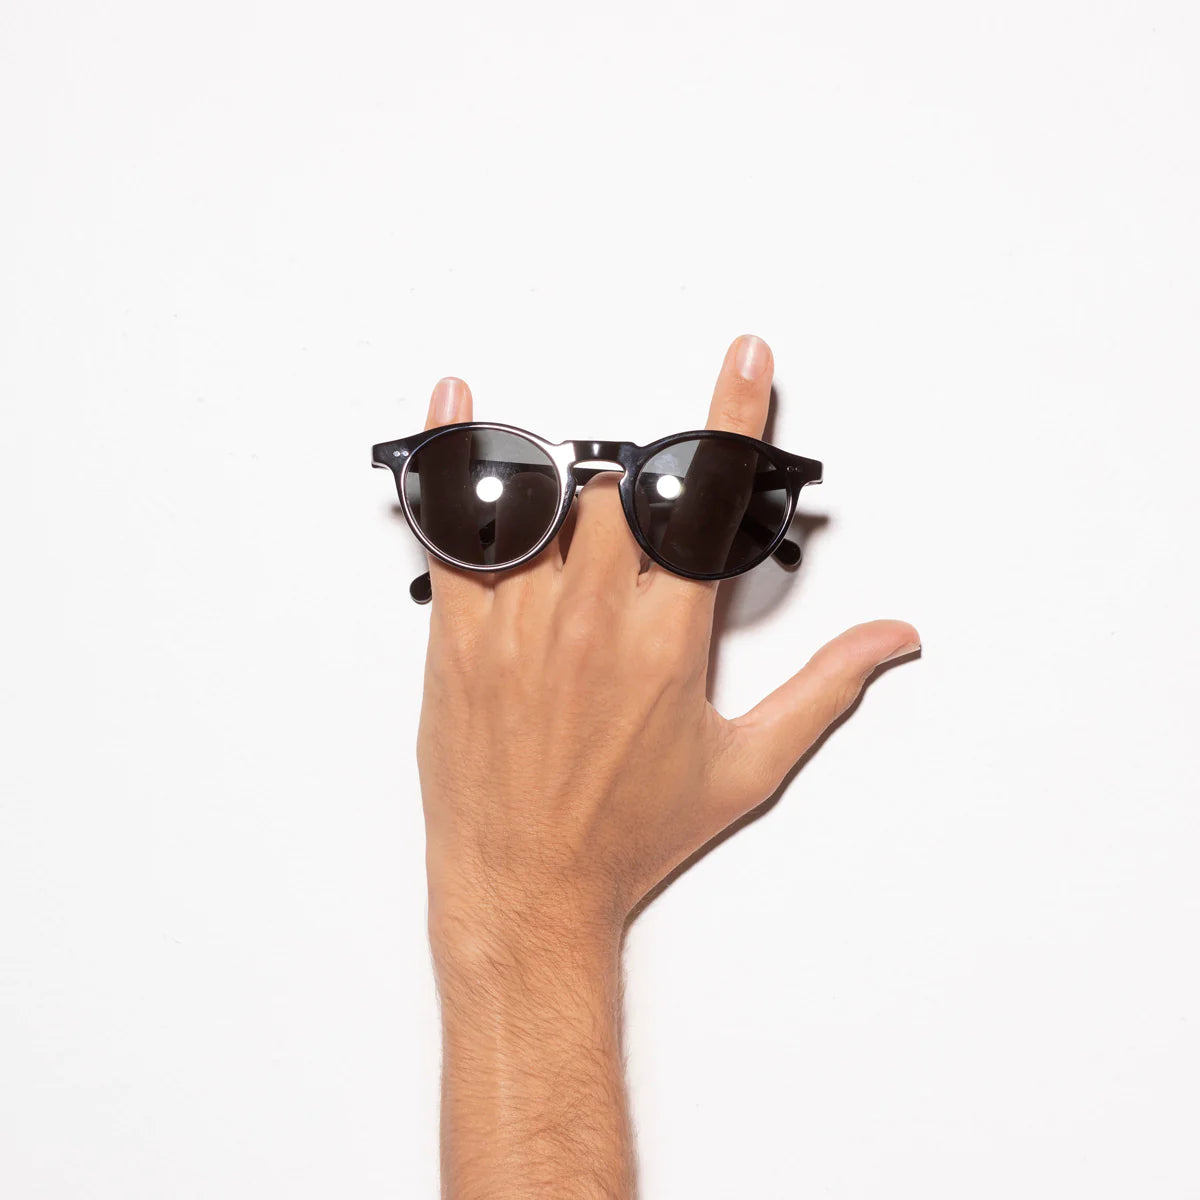 Status Anxiety Ascetic Sunglasses in Black